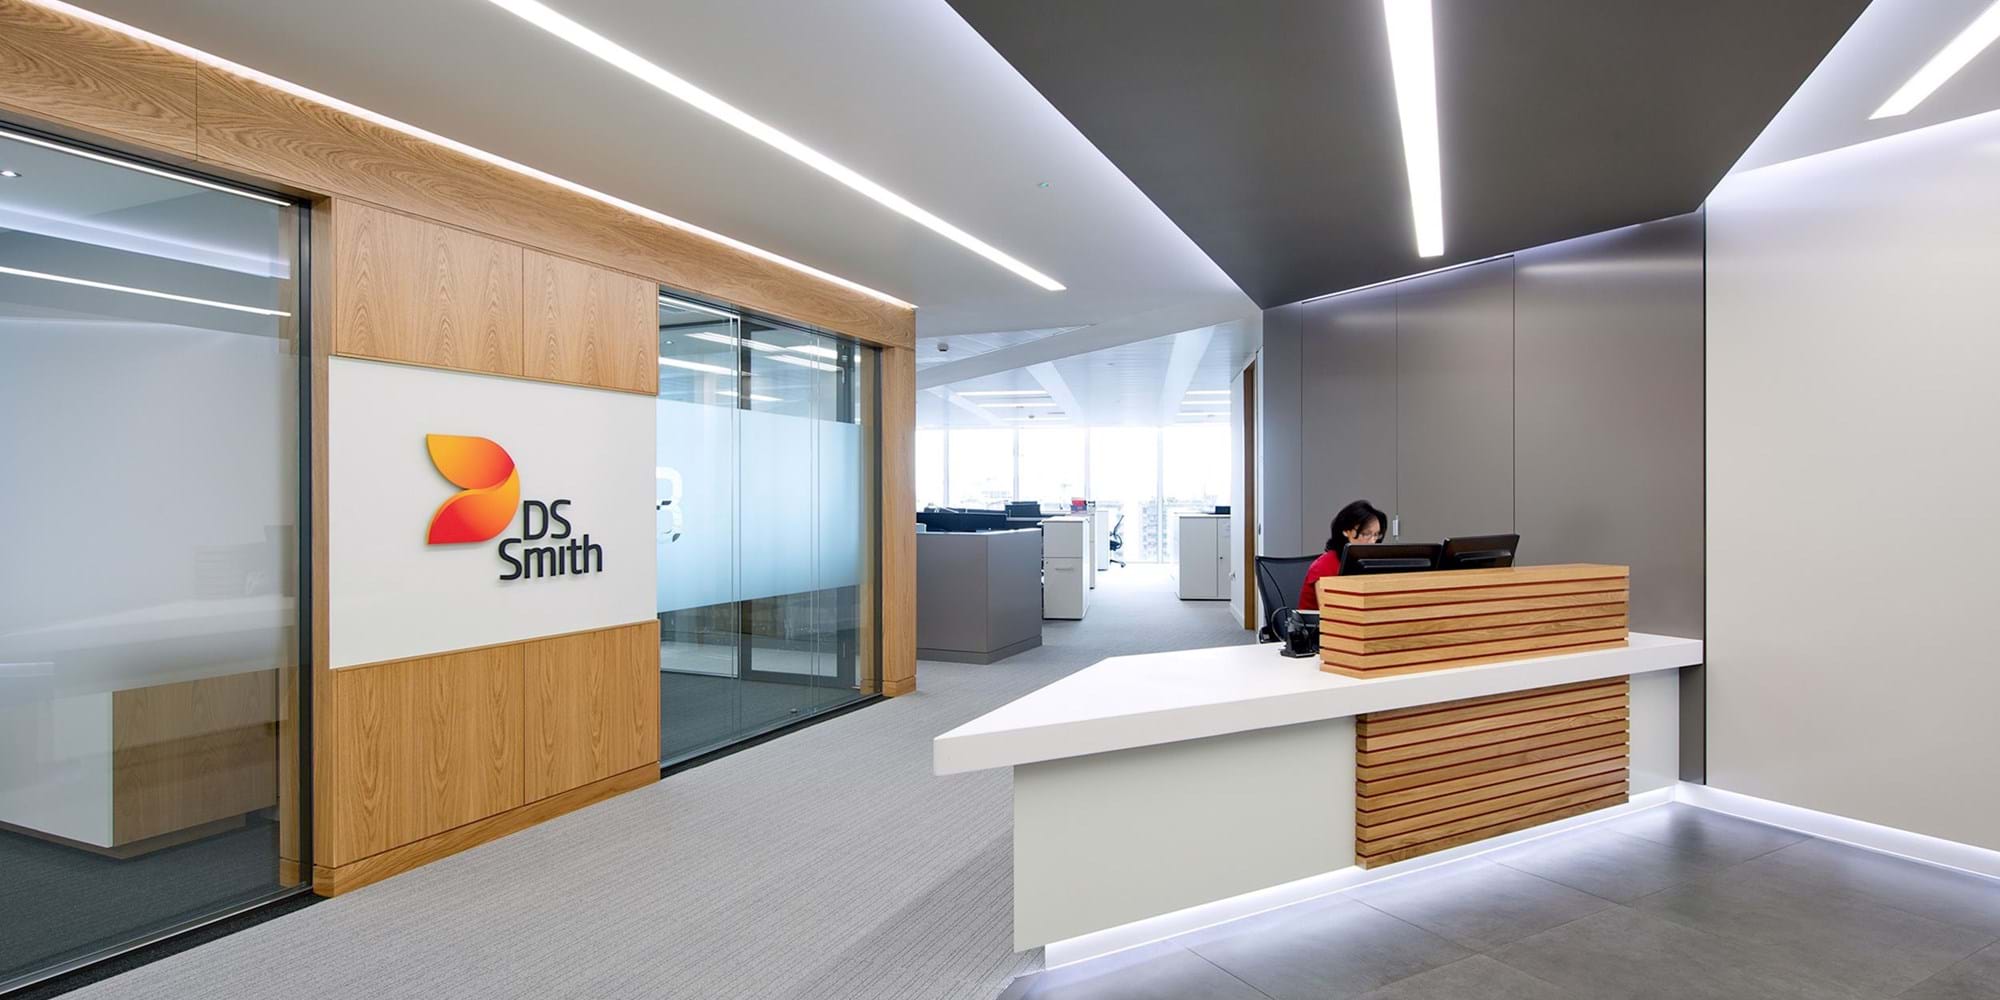 Modus Workspace office design, fit out and refurbishment - DS Smith - Reception - DS Smith 02.jpg